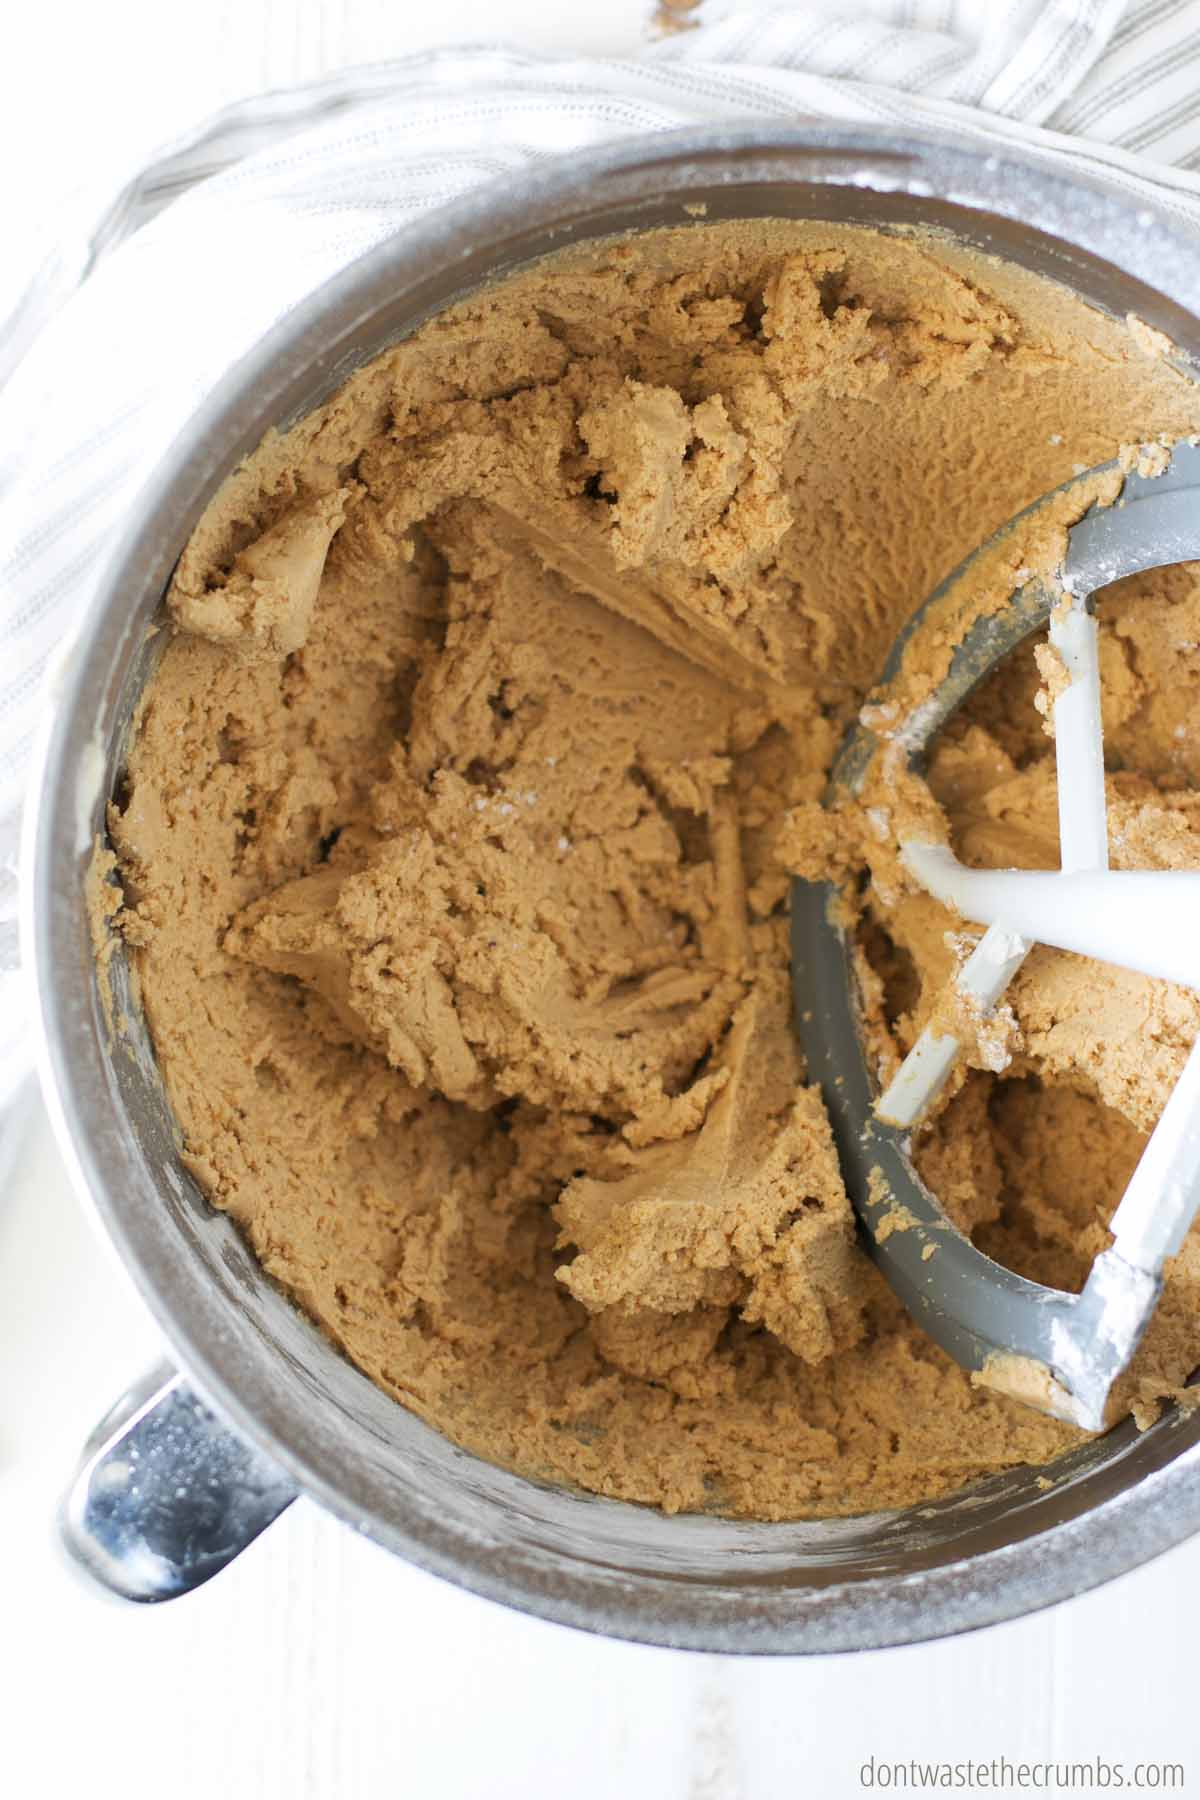 Mixing peanut butter frosting recipe in mixer.